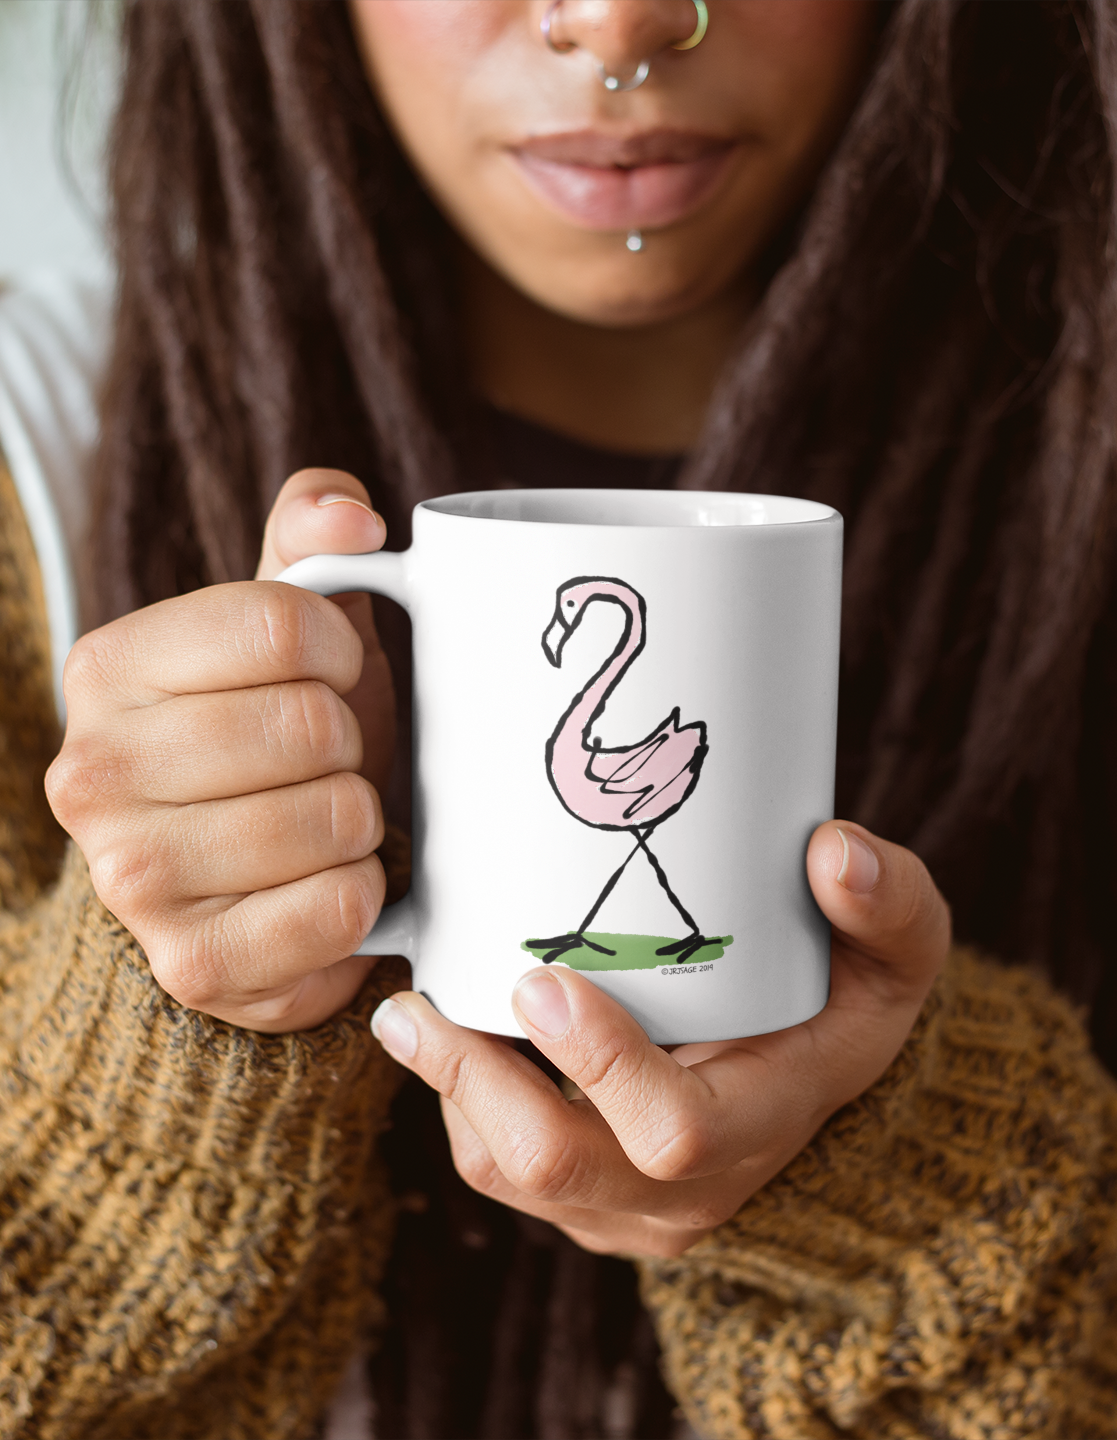 A woman holding a White Ceramic Hector and Bone Mug with an illustration of a cute Pink Flamingo